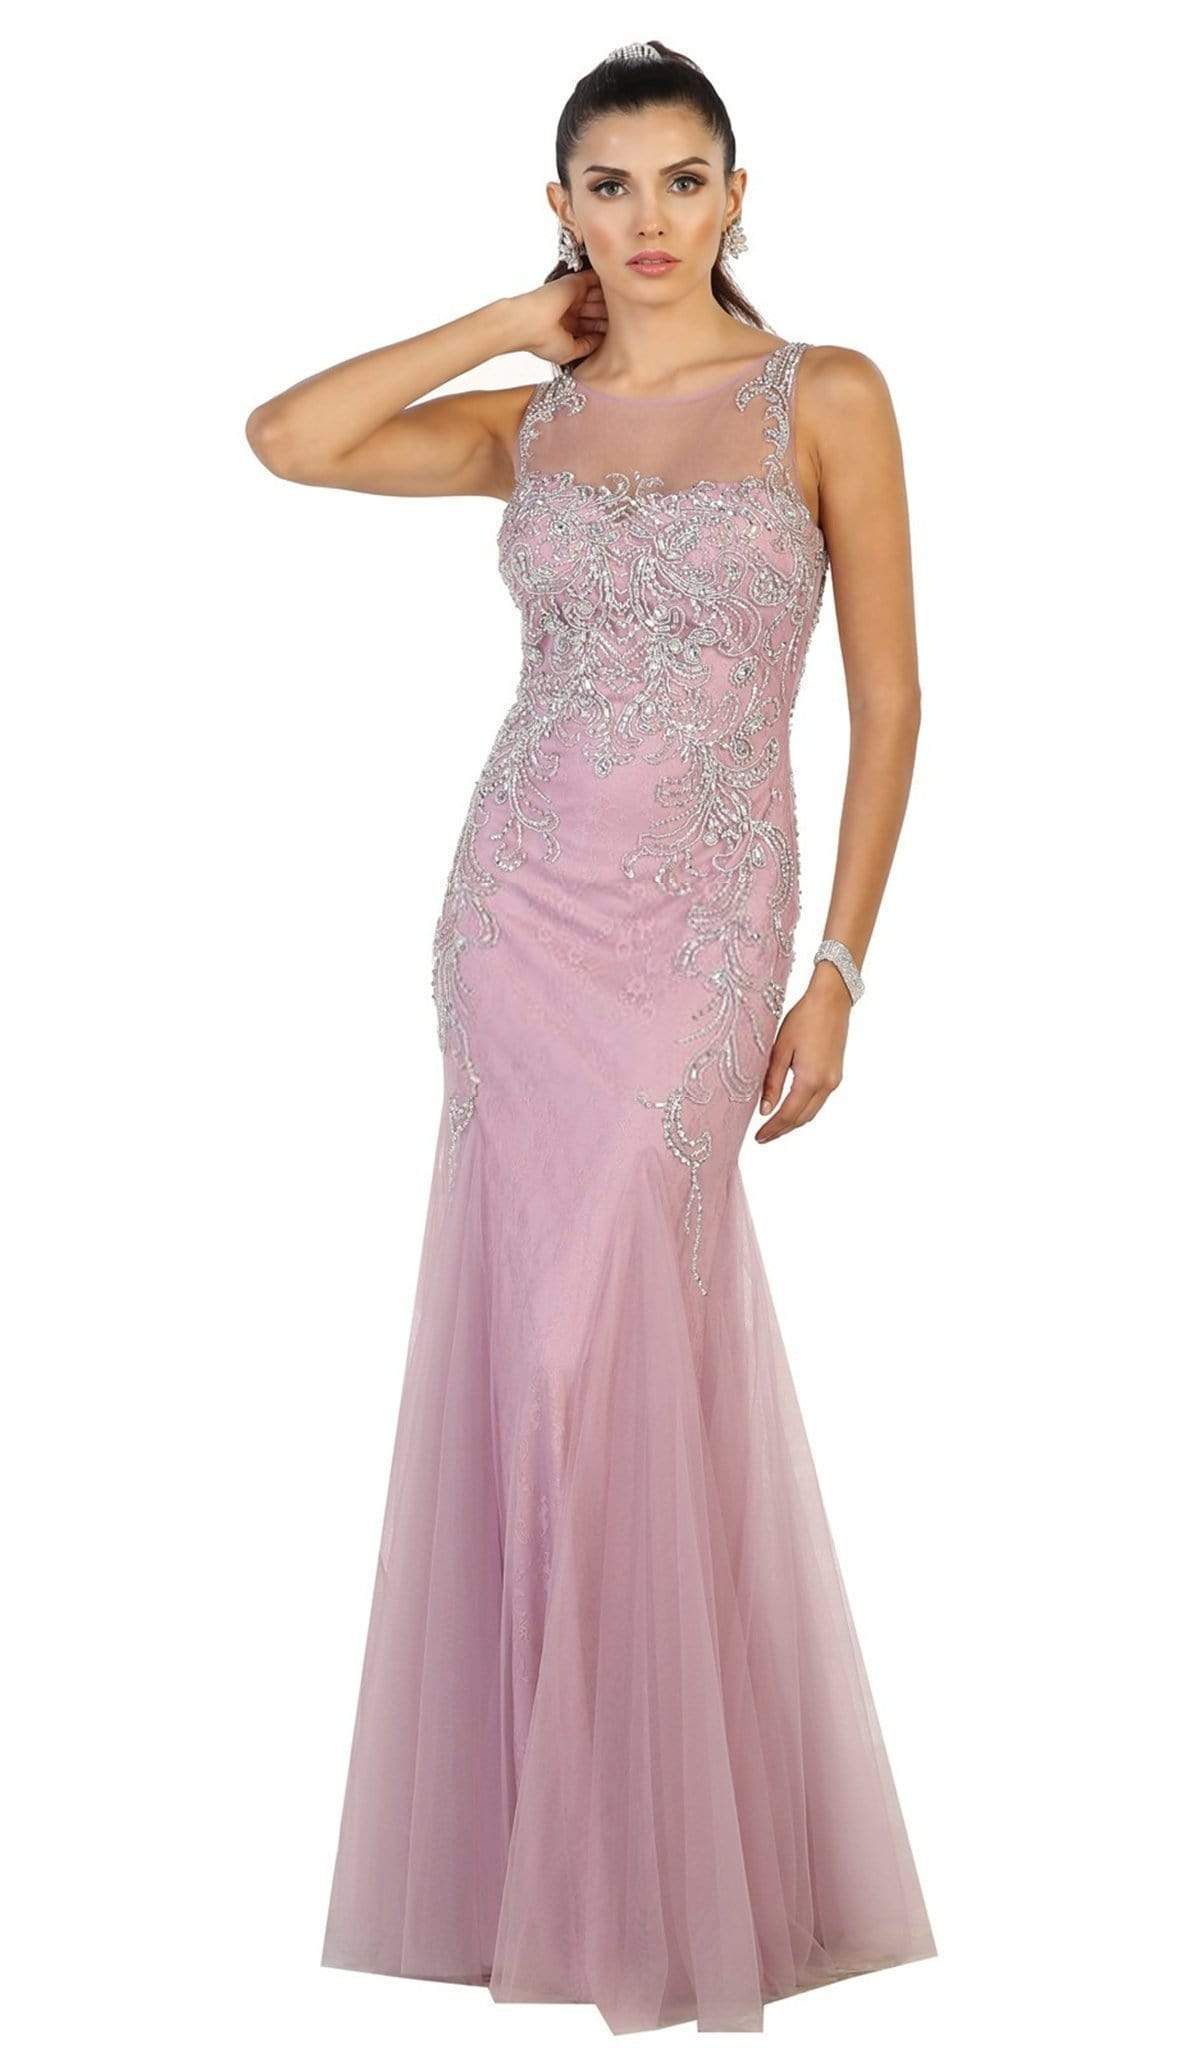 May Queen - Bedazzled Illusion Bateau Trumpet Prom Dress Special Occasion Dress 4 / Mauve